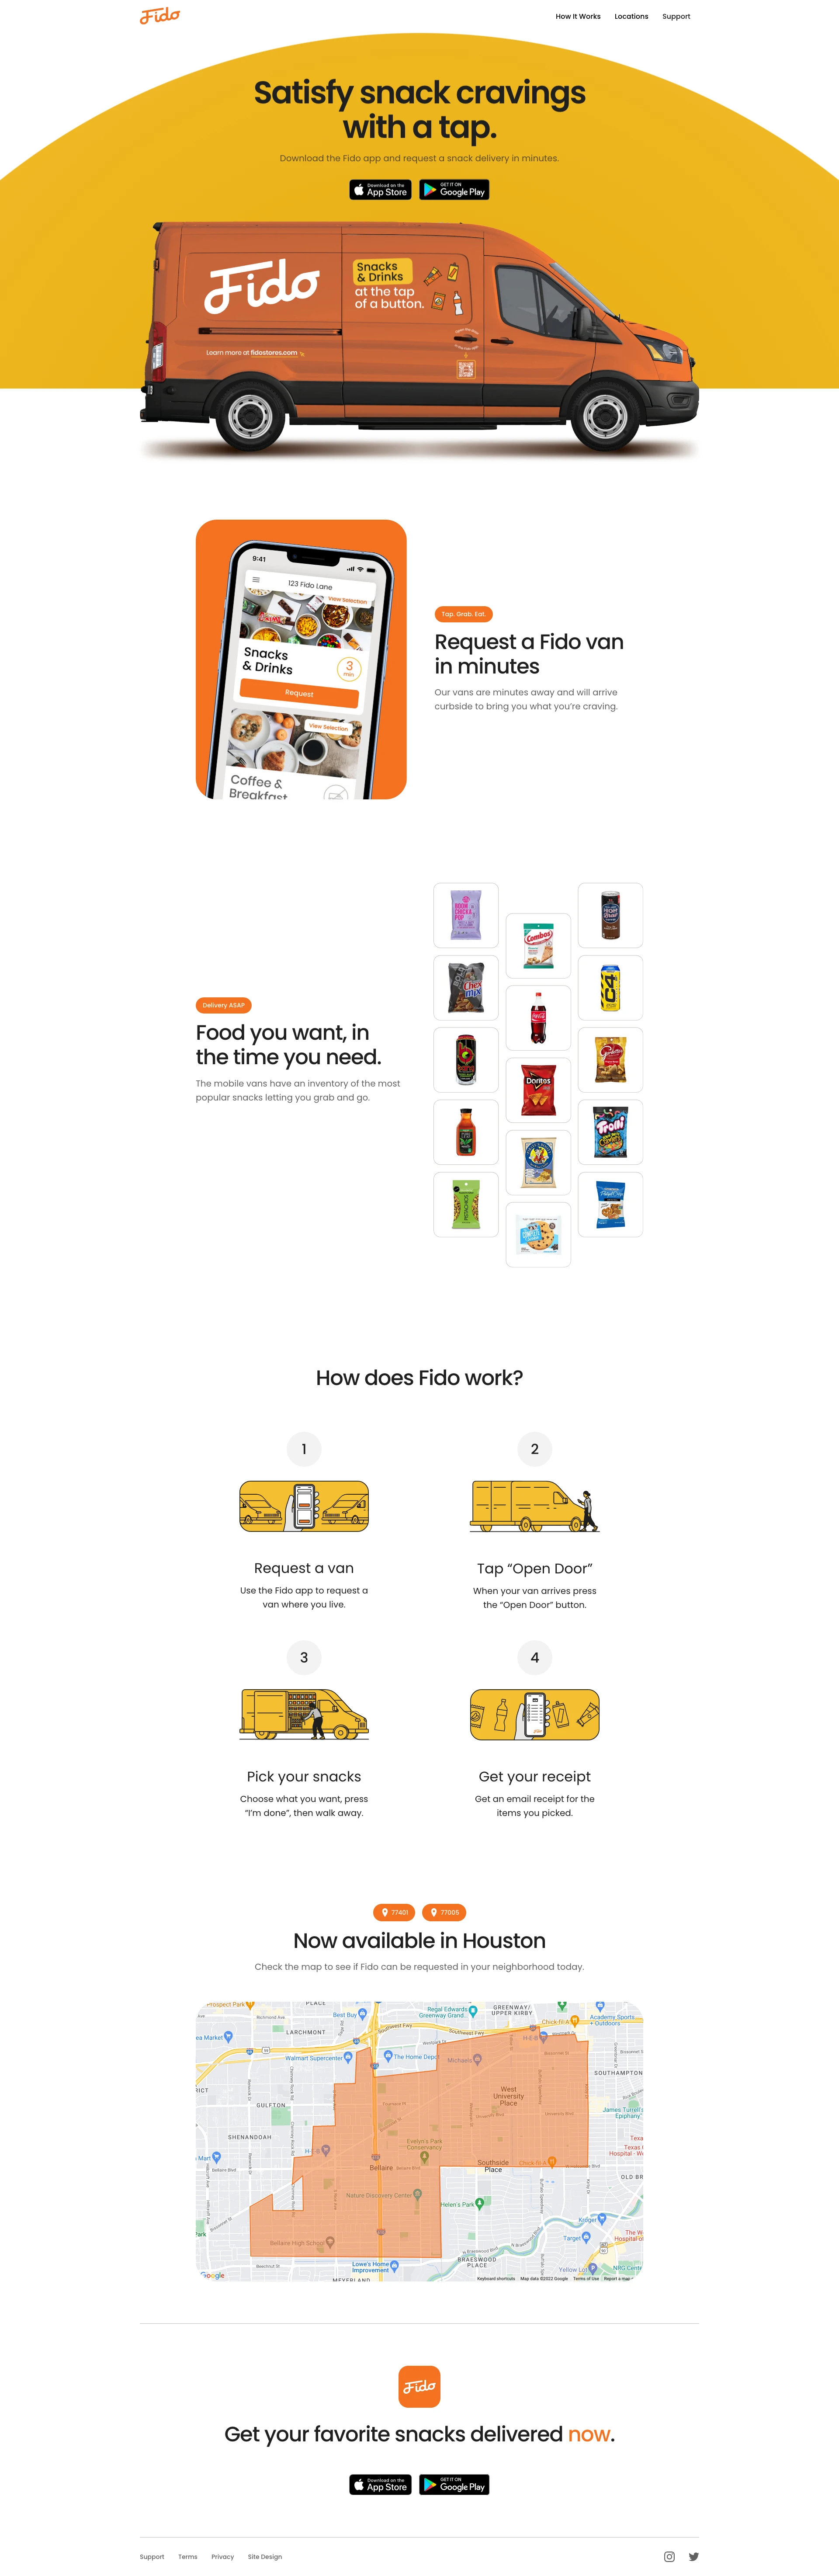 Fido Landing Page Example: Your favorite snacks delivered now. Satisfy snack cravings with a tap.